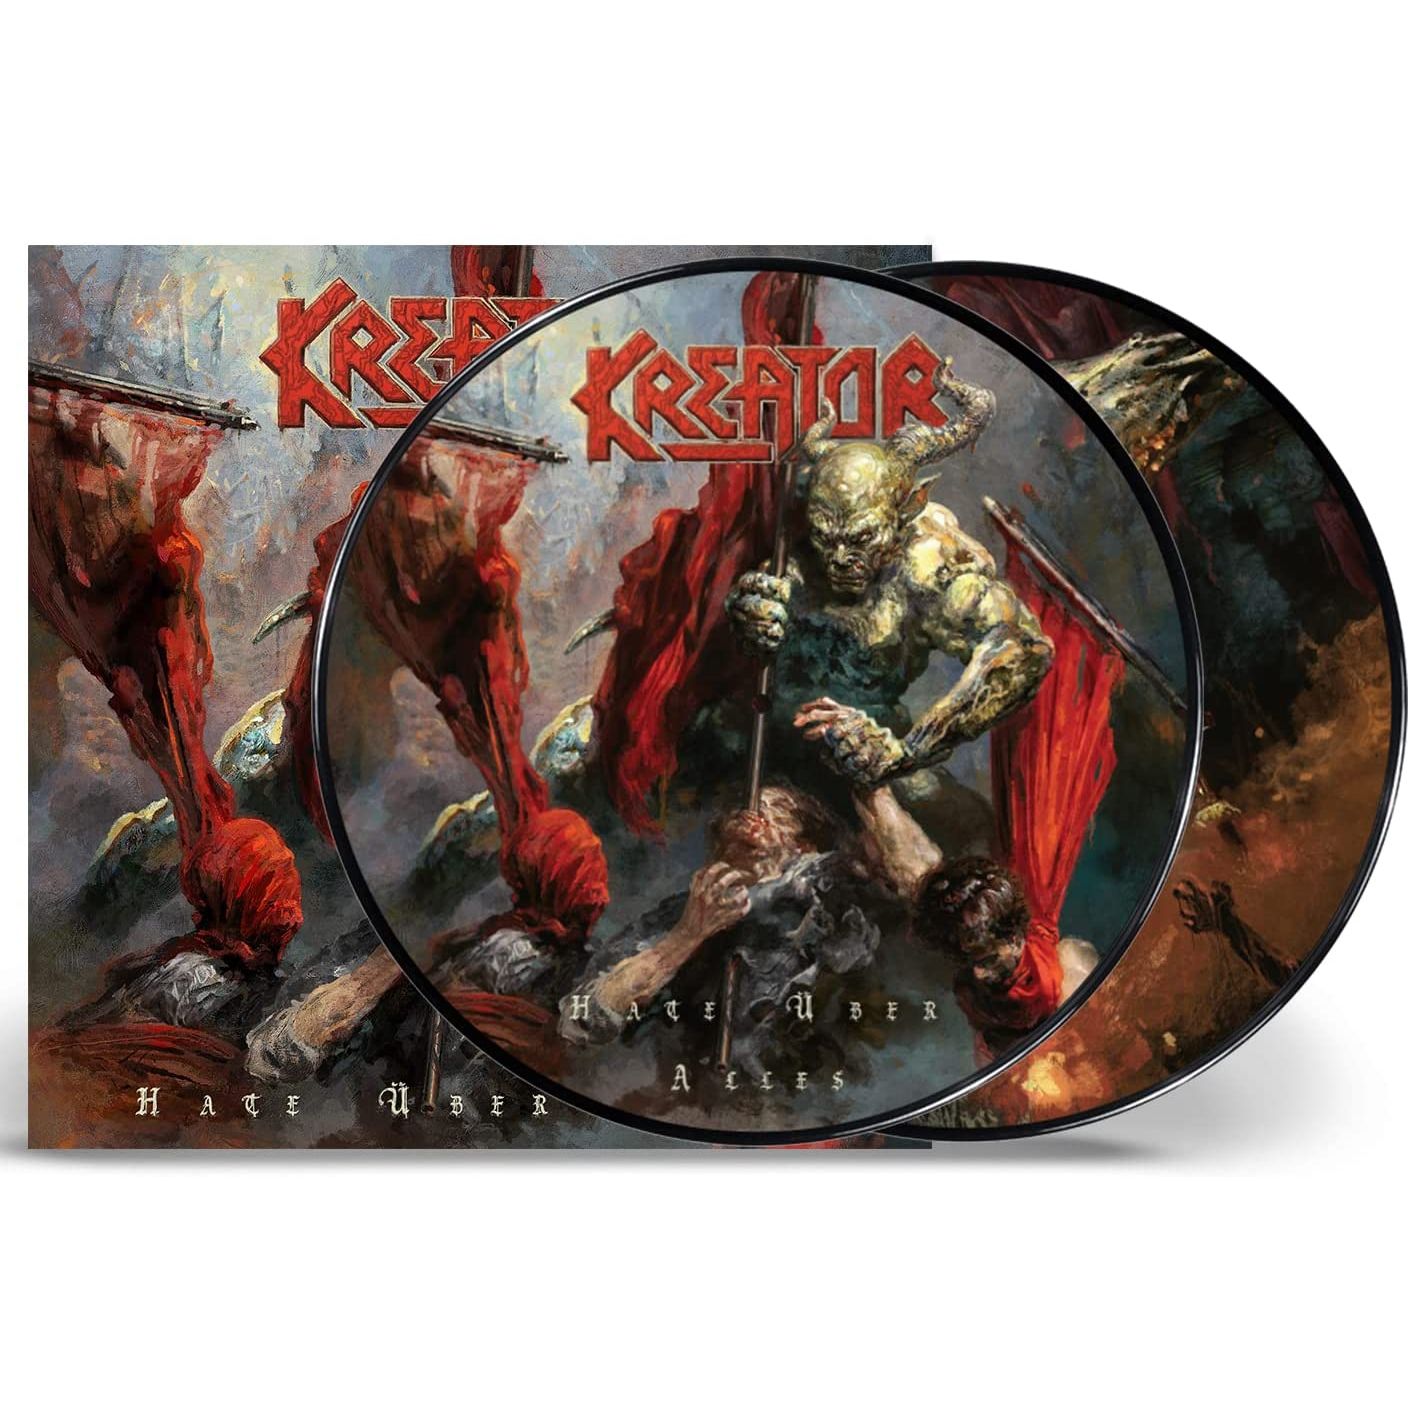 HATE UBER ALLES (PICTURE DISC)